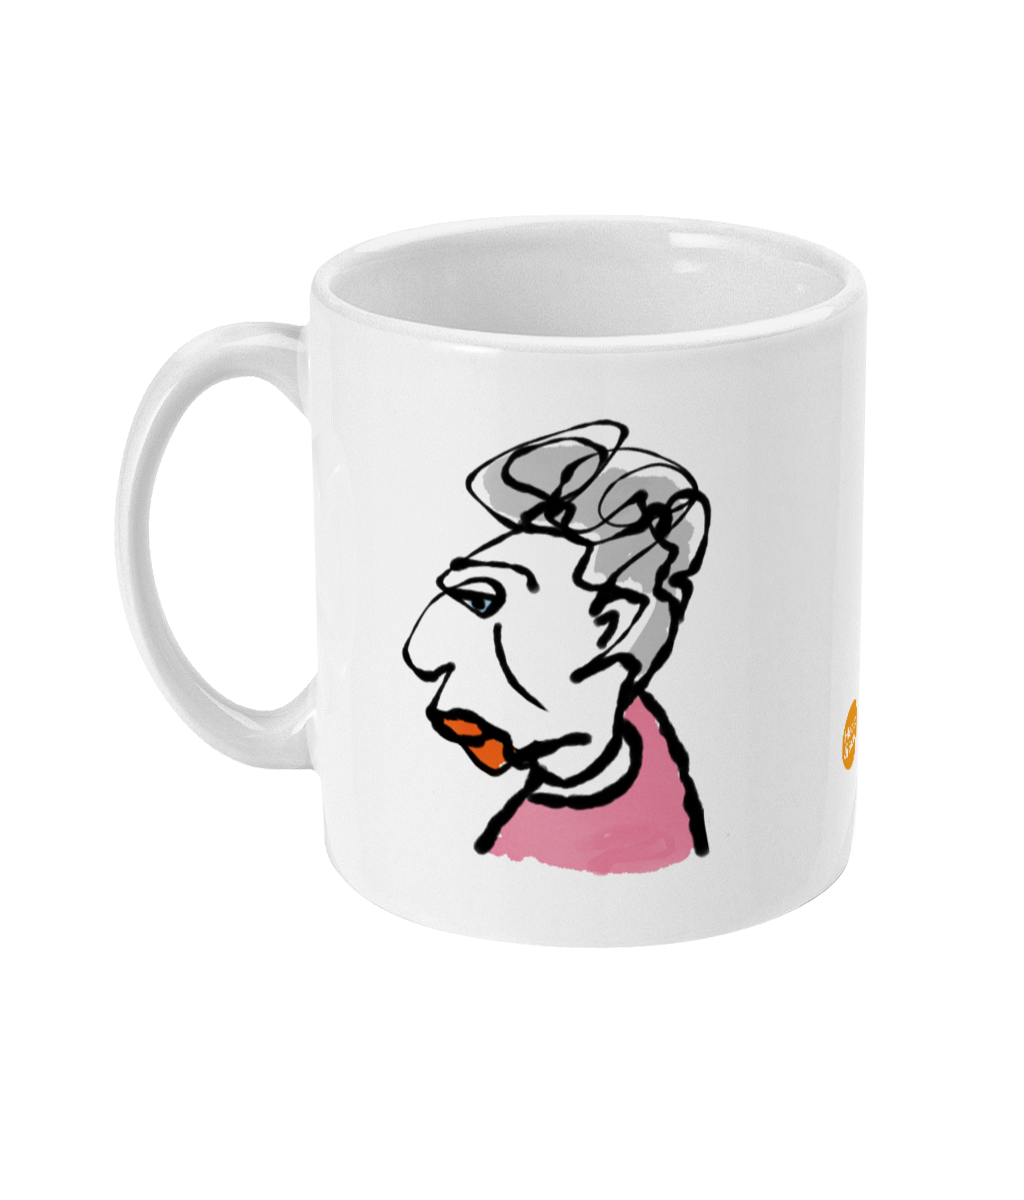 Glamorous Granny design on a coffee mug by Hector and Bone Left View